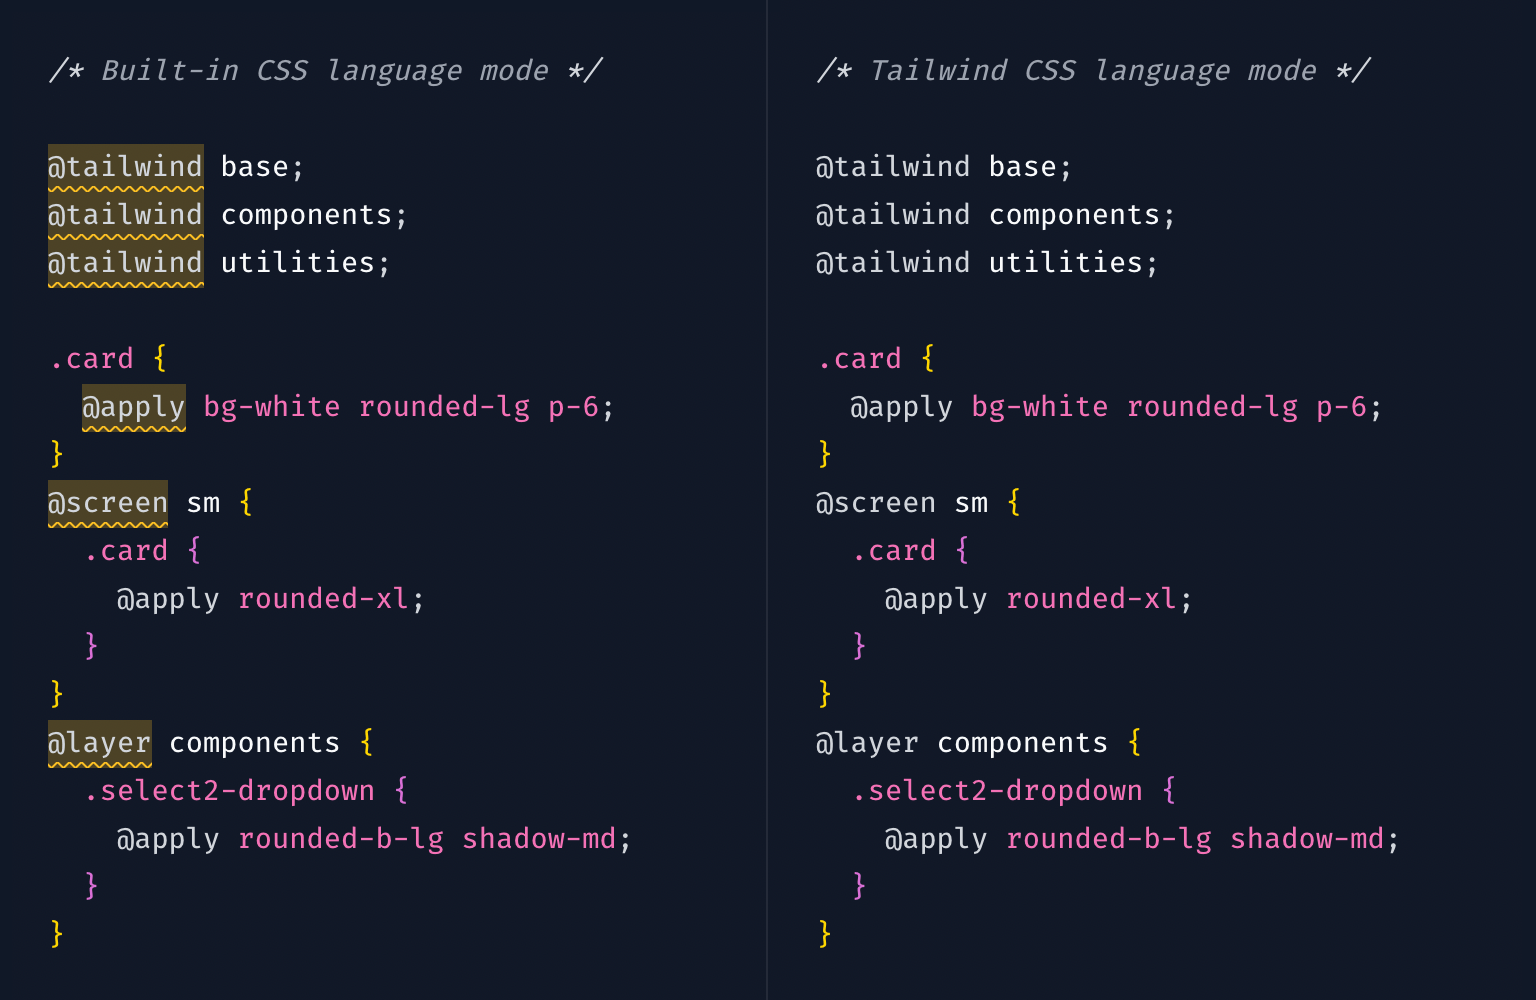 Sample CSS code shown with lint warnings when using built-in CSS language mode, and no lint warnings when using the Tailwind CSS language mode.